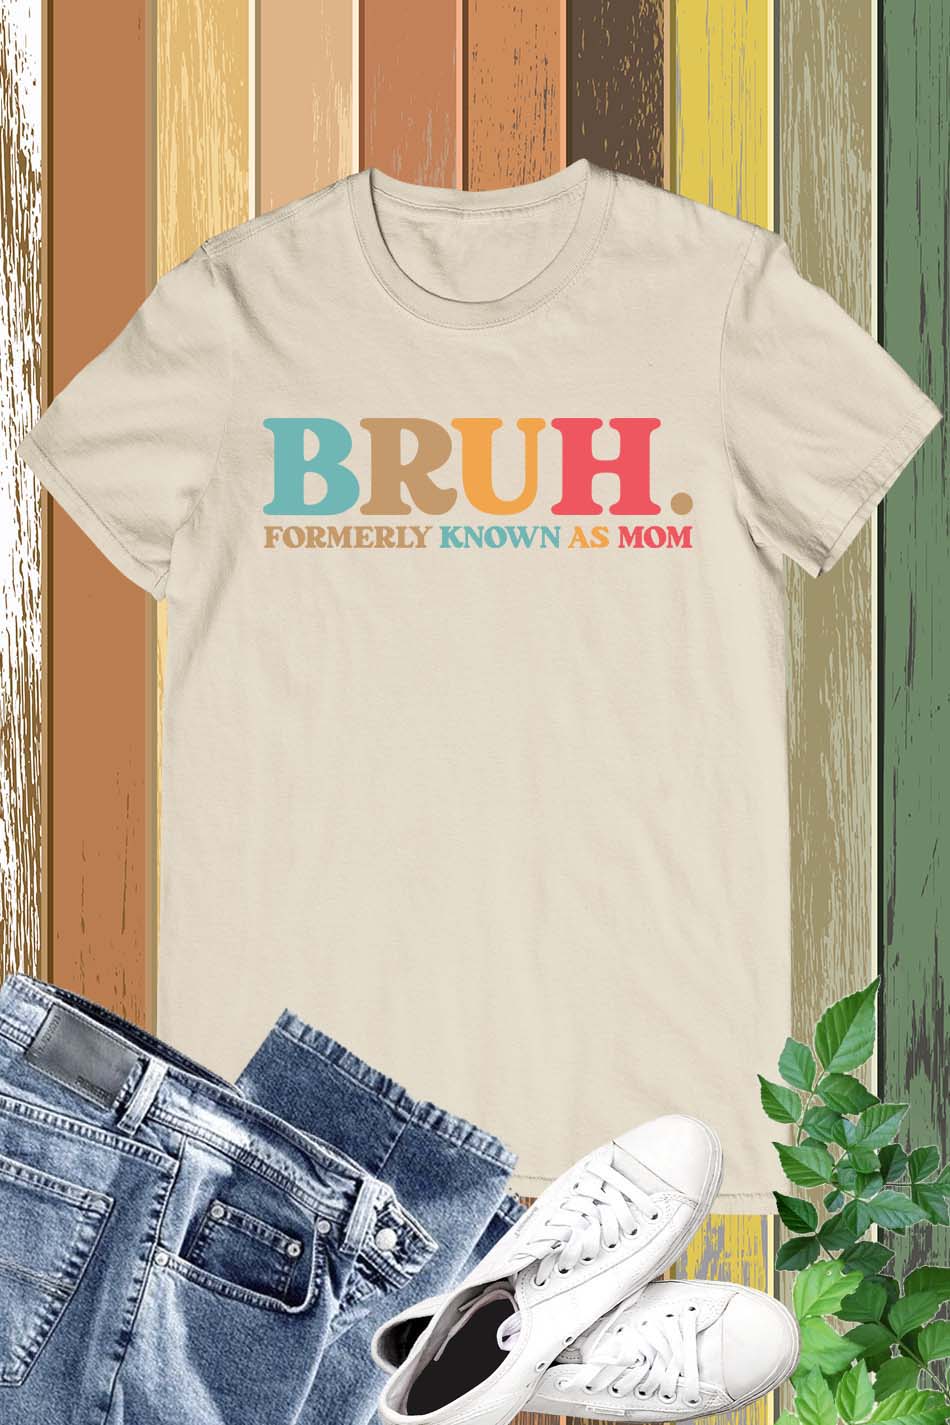 Bruh Formerly known as Mom Shirts